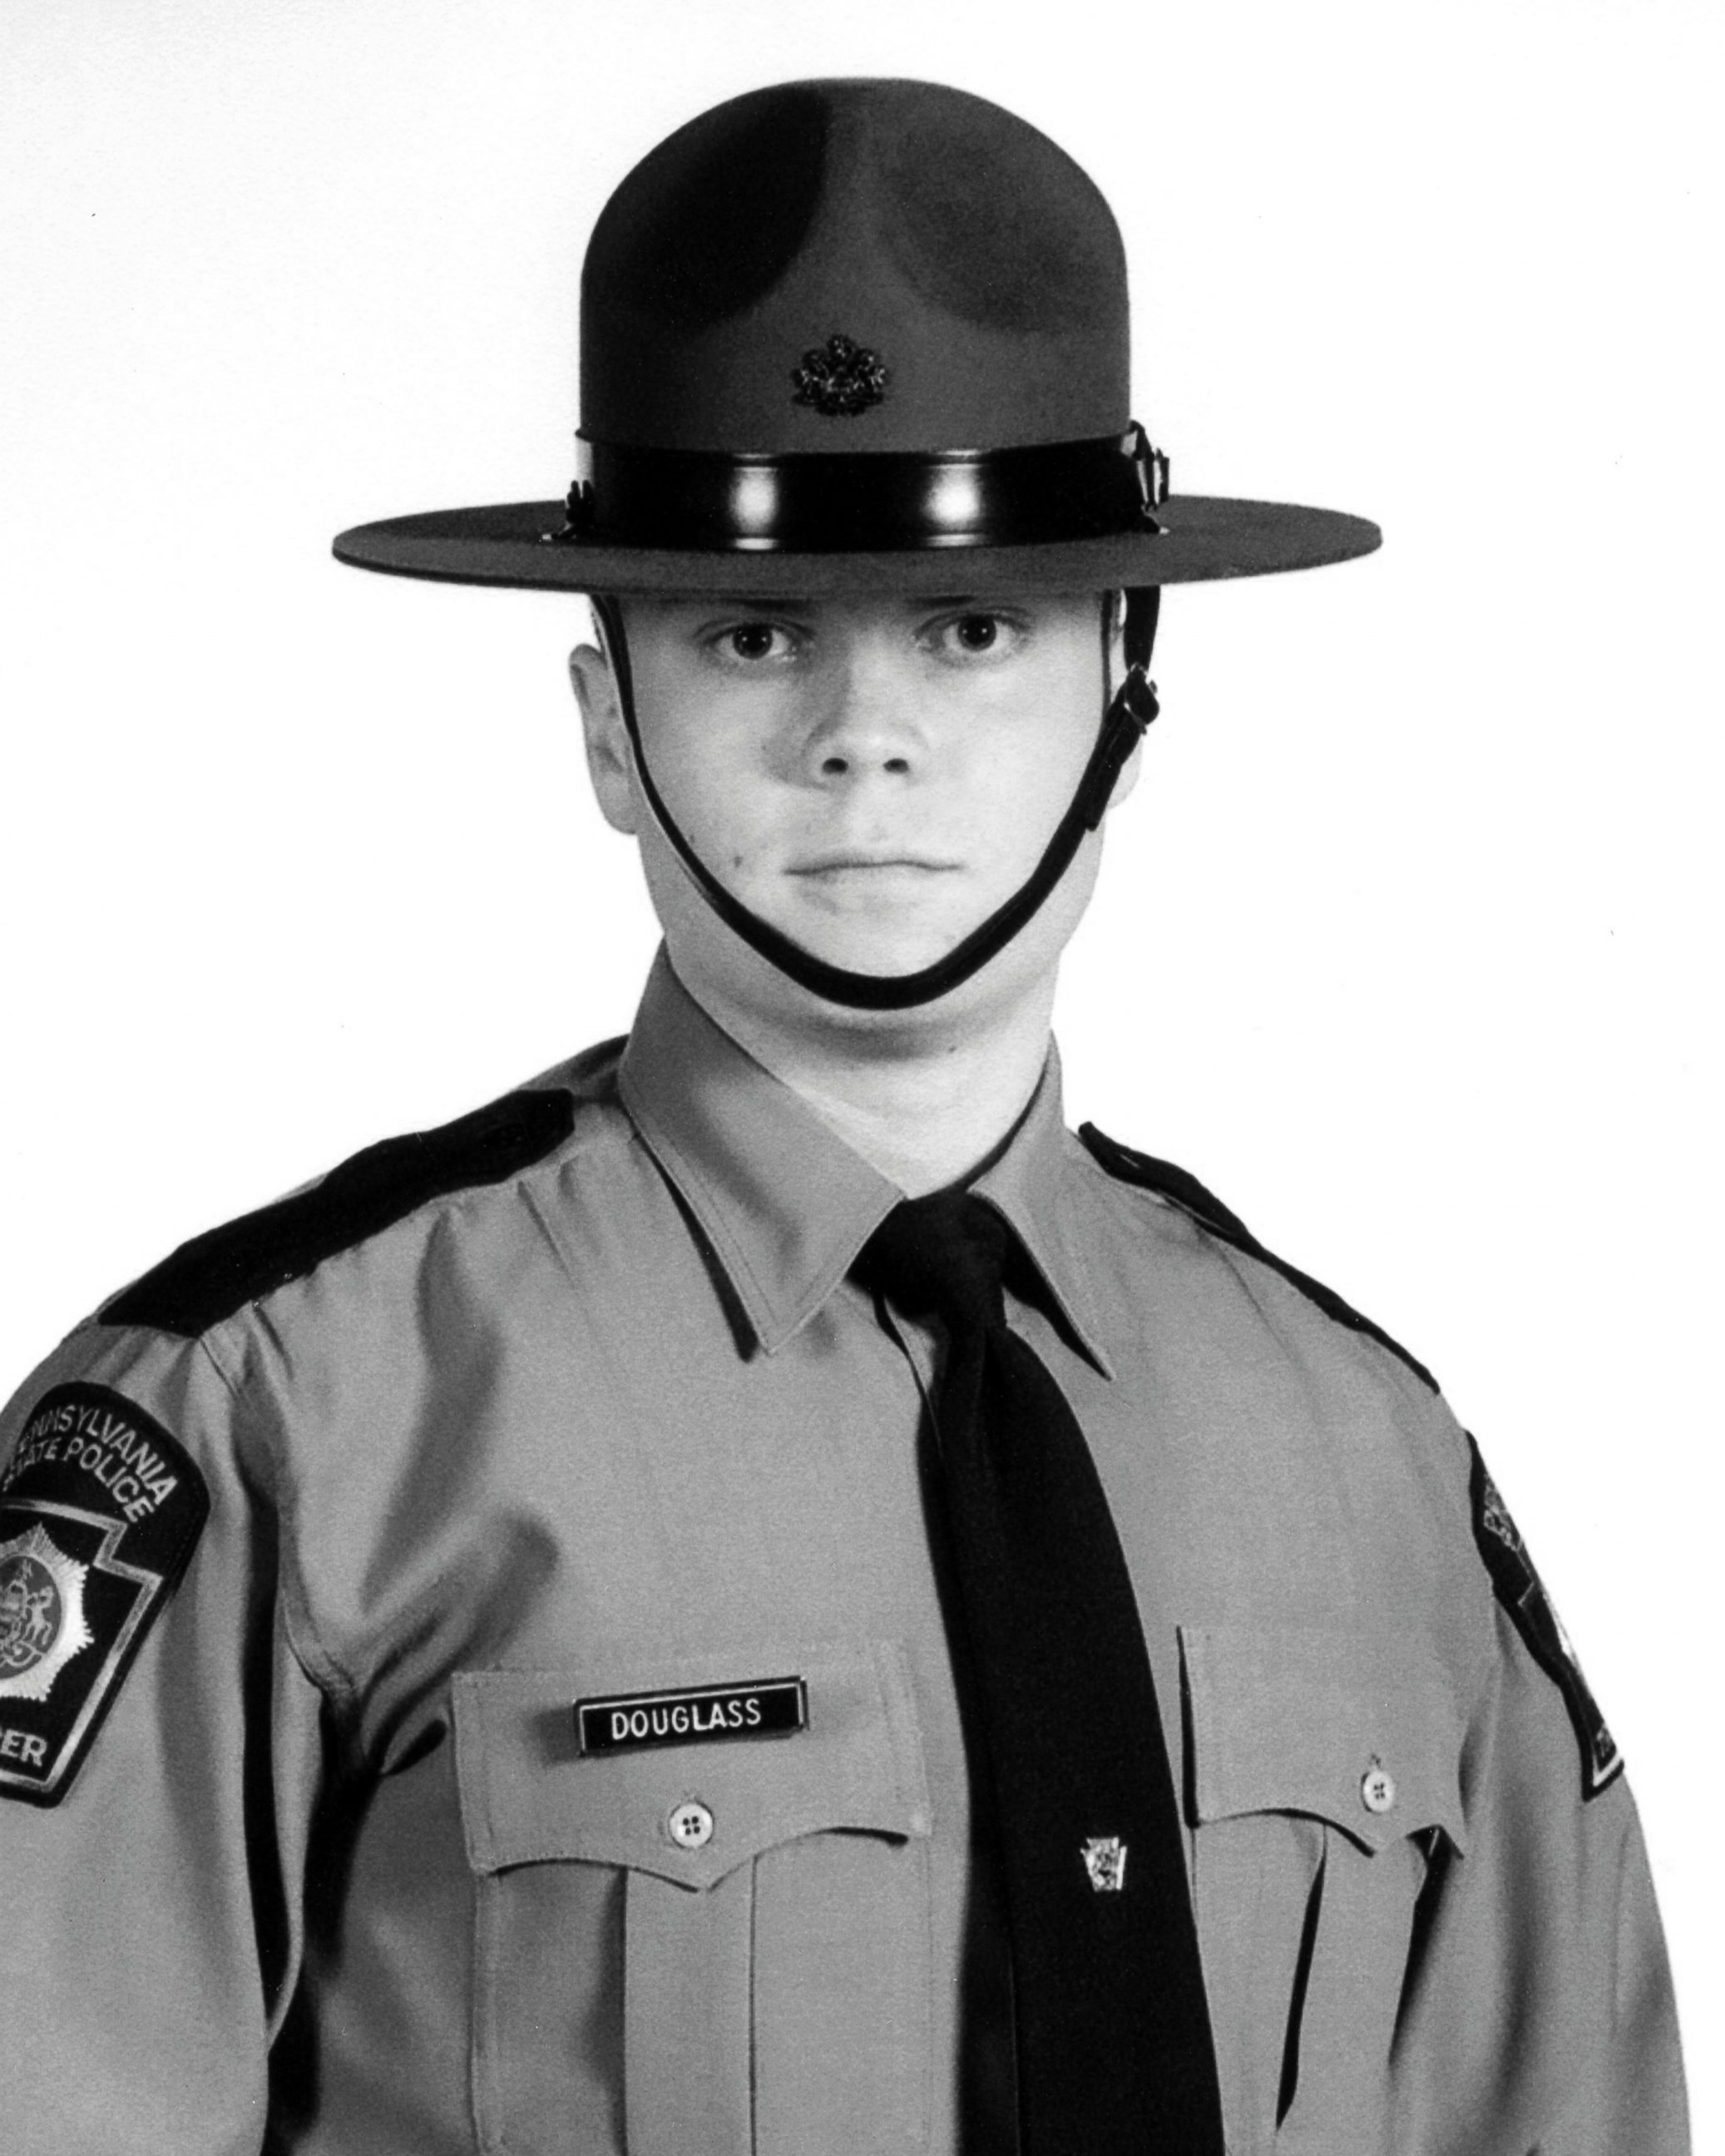 PHOTO: This undated file photo provided by the Pennsylvania State Police shows Trooper Alex Douglass.